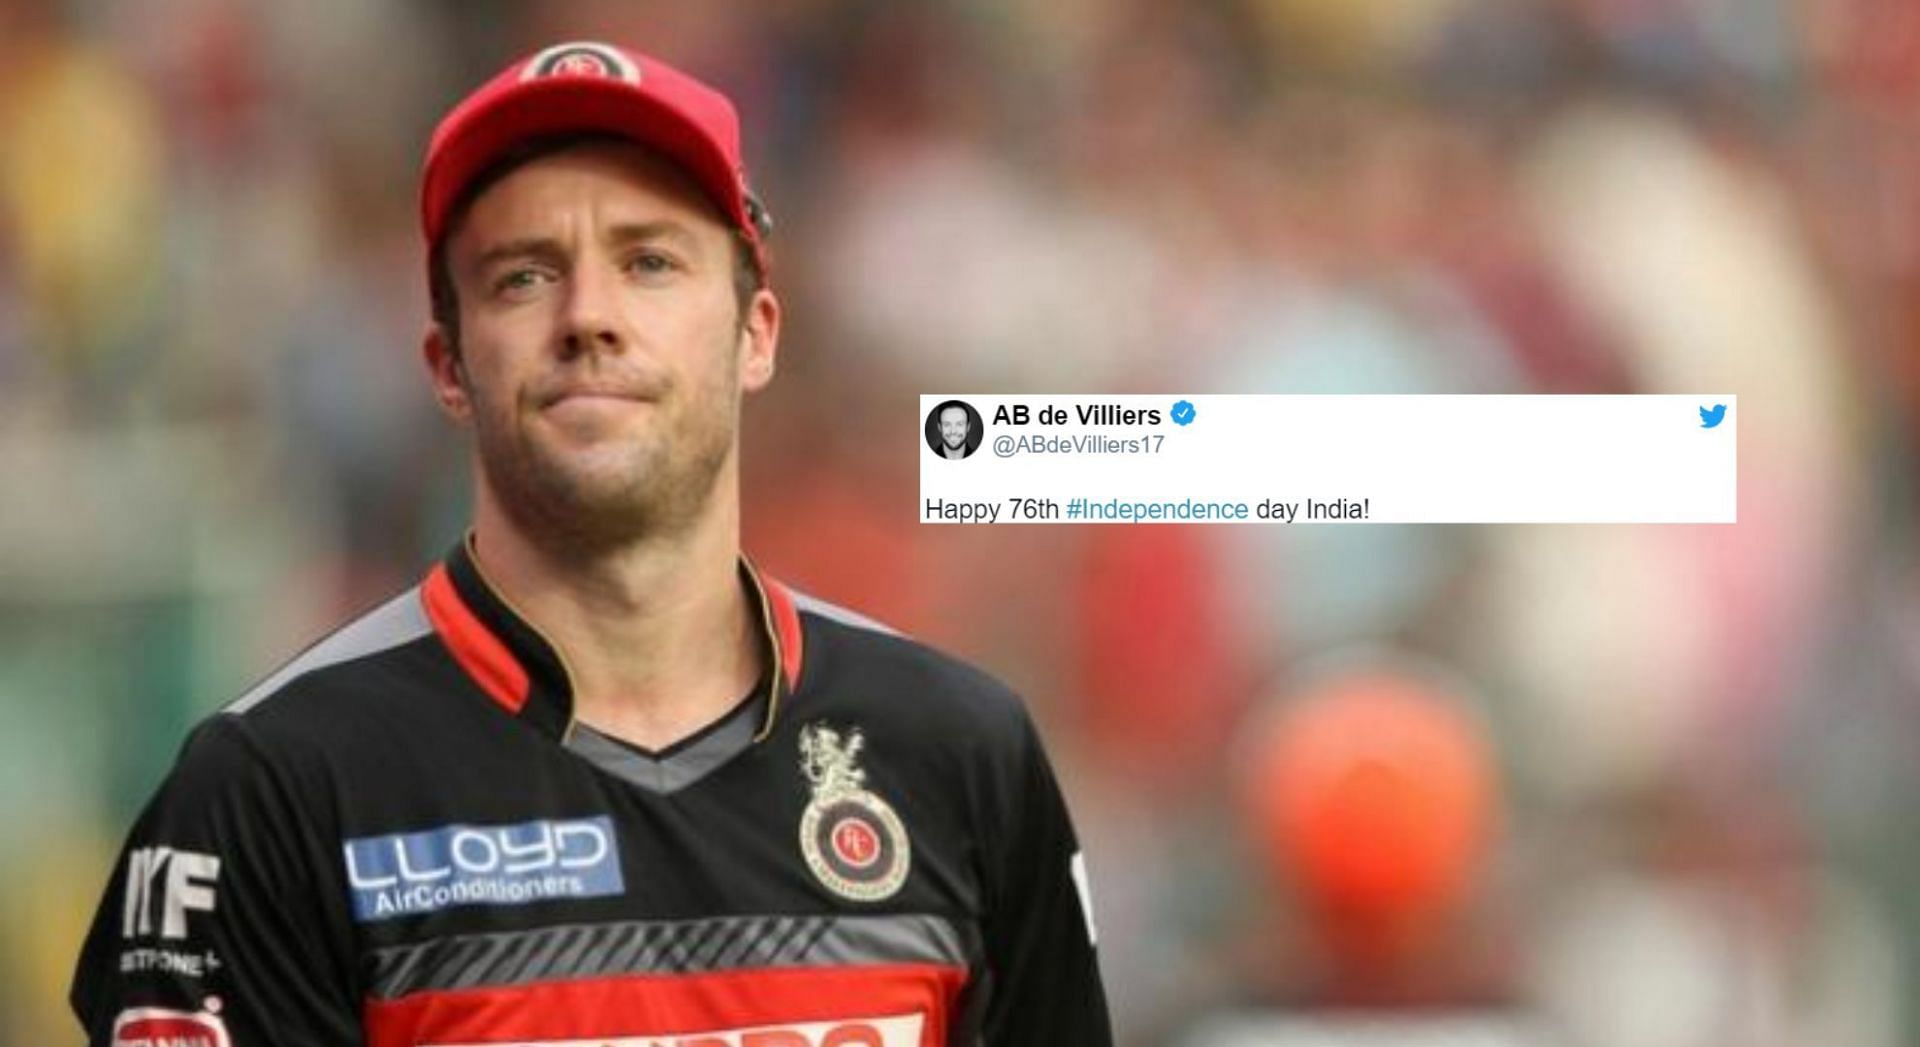 AB de Villiers congratulated India on Independence Day.